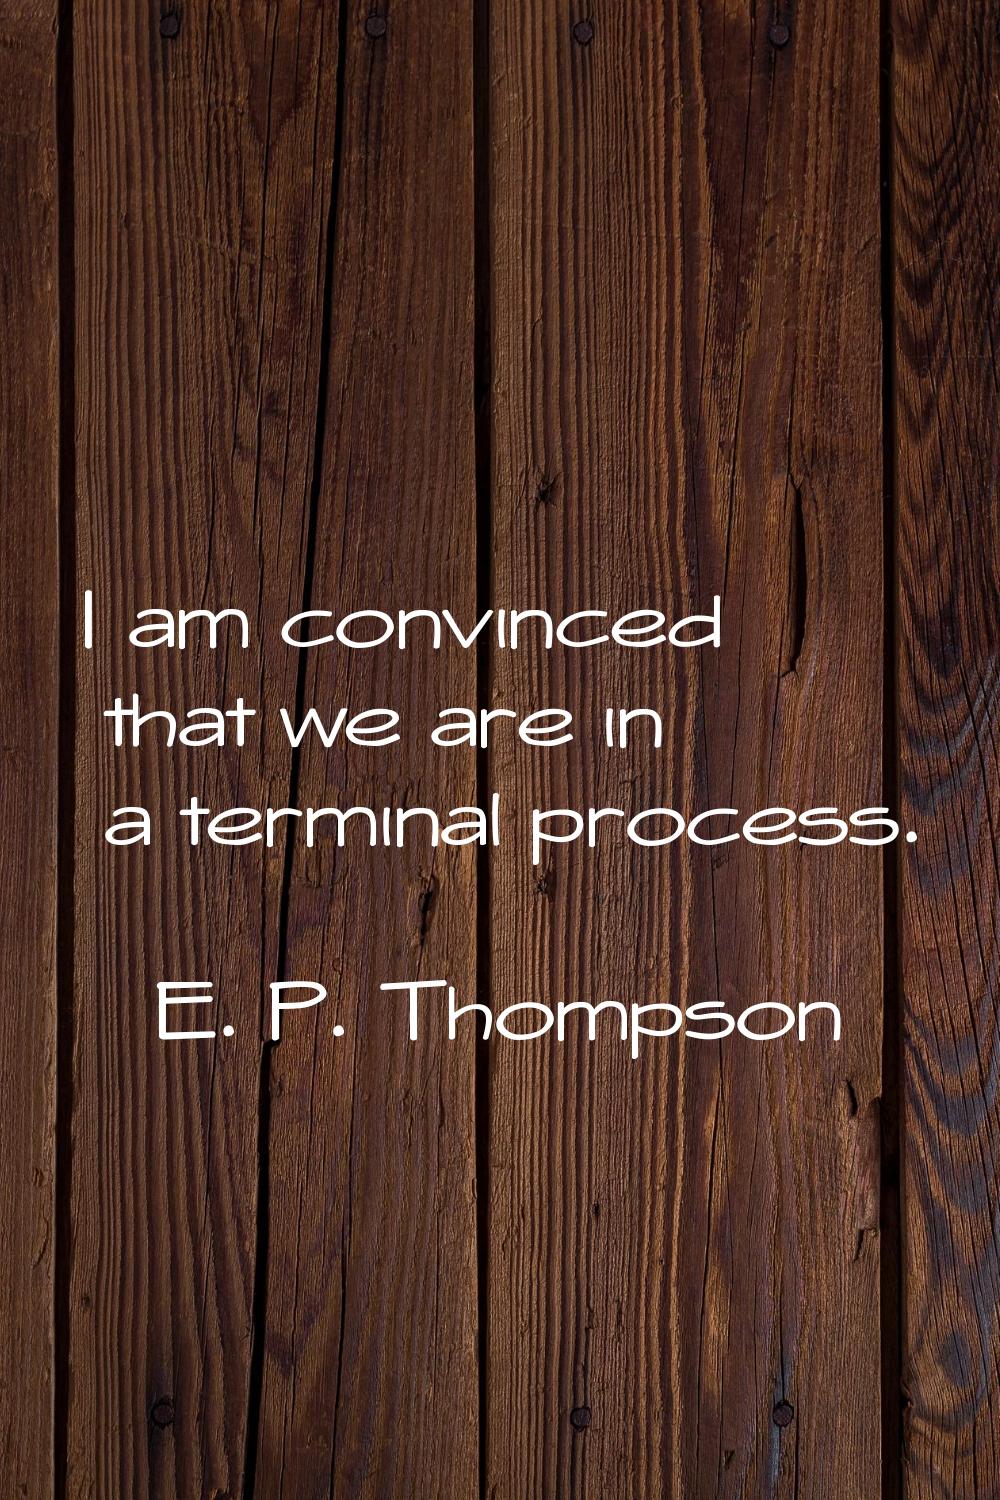 I am convinced that we are in a terminal process.